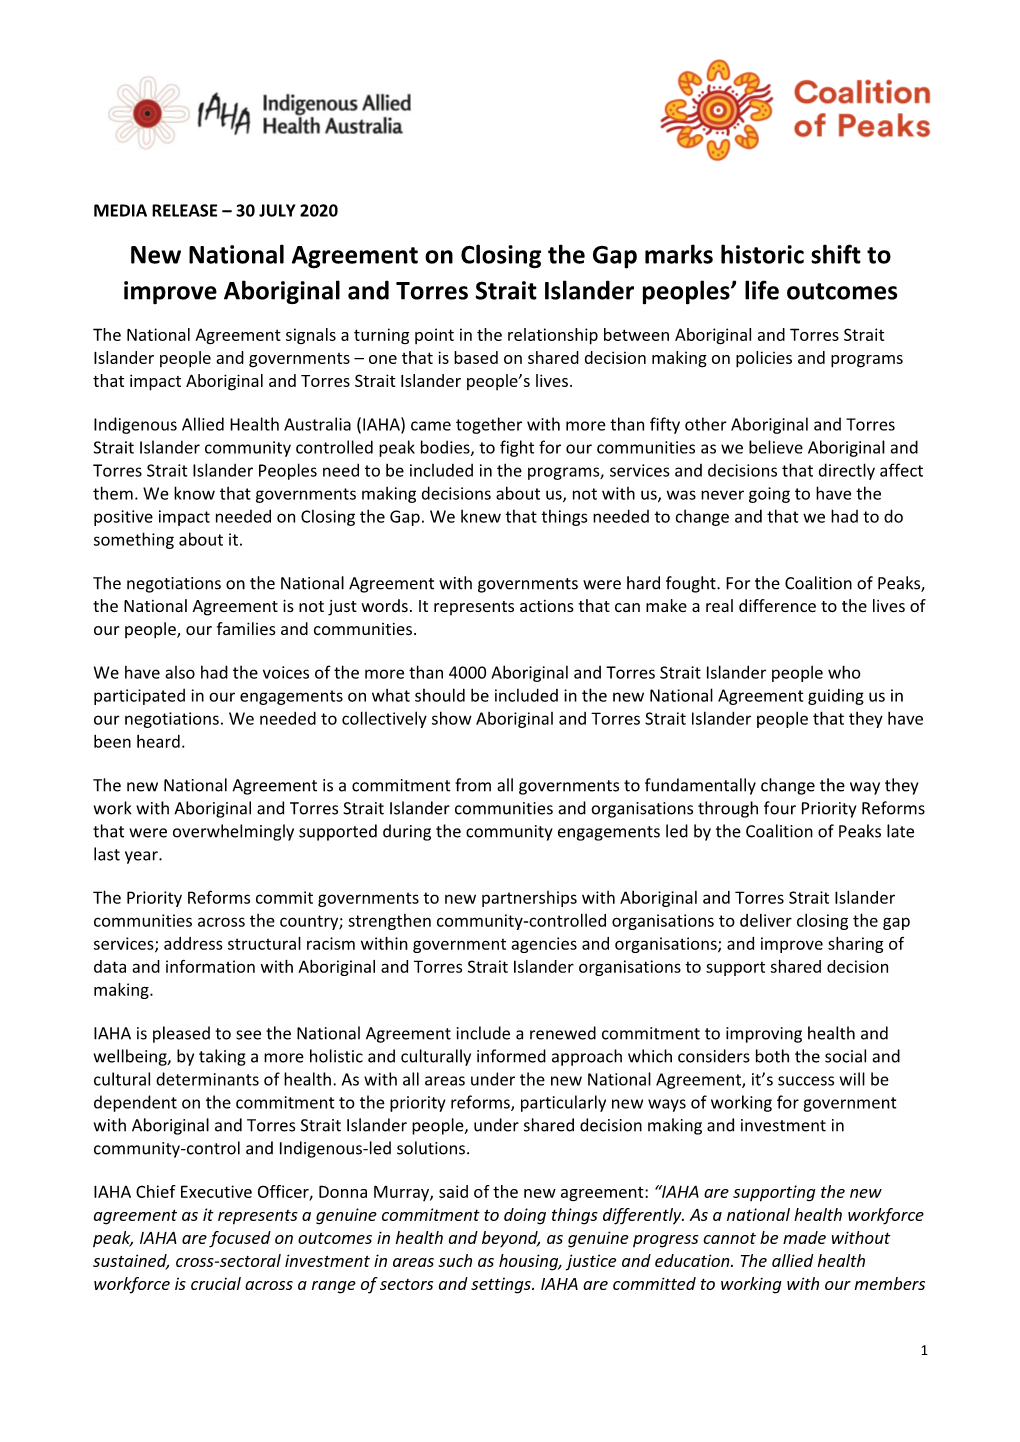 New National Agreement on Closing the Gap Marks Historic Shift to Improve Aboriginal and Torres Strait Islander Peoples’ Life Outcomes